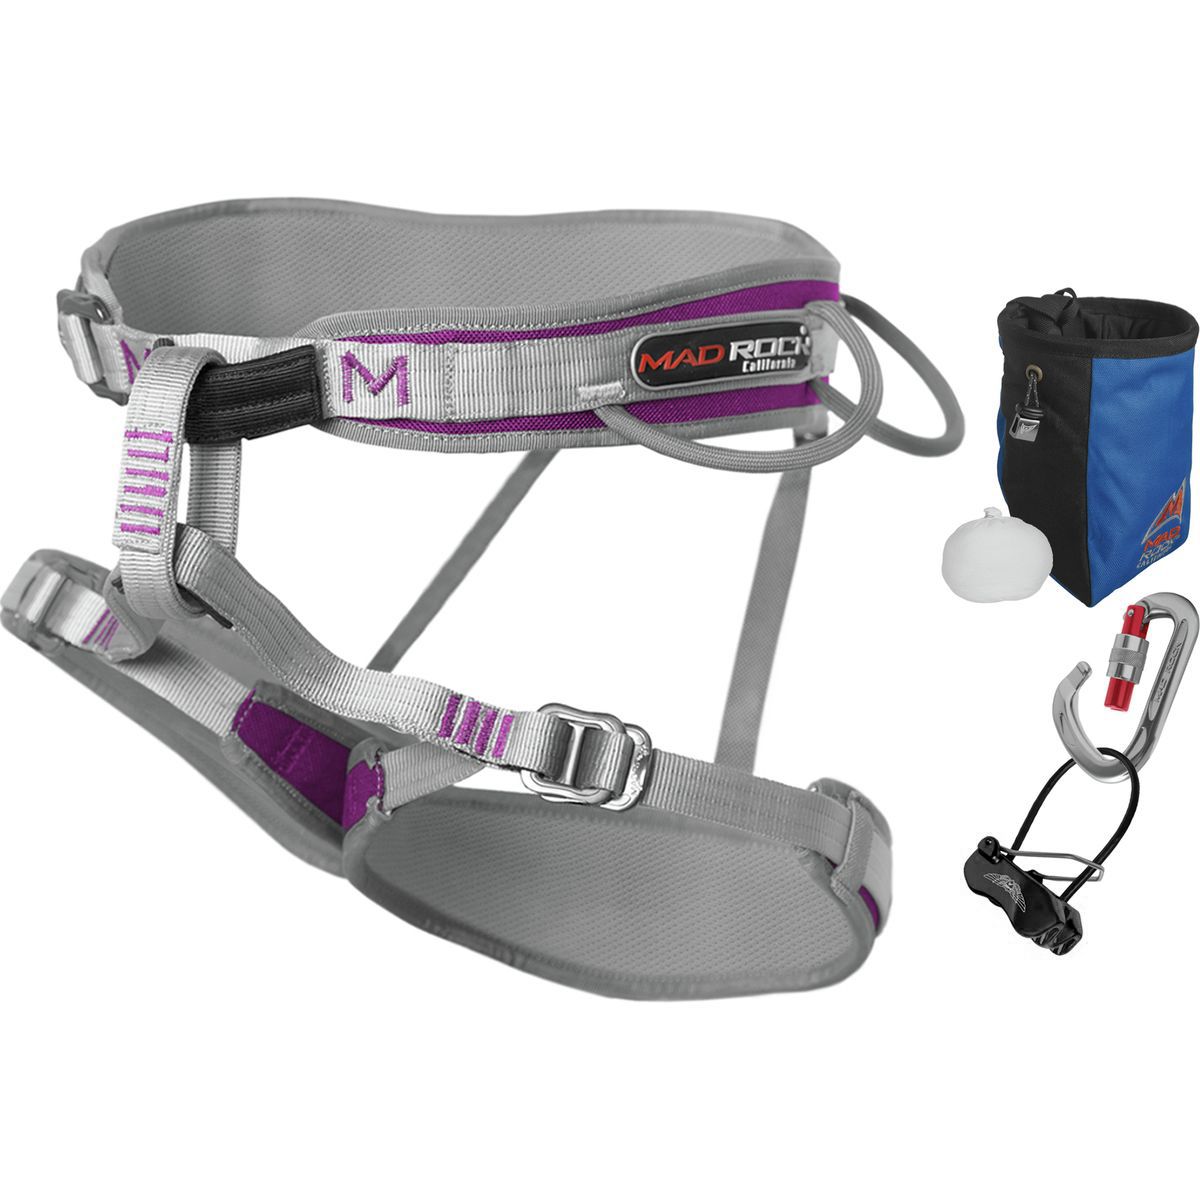 Mad Rock Venus Deluxe Climbing Package